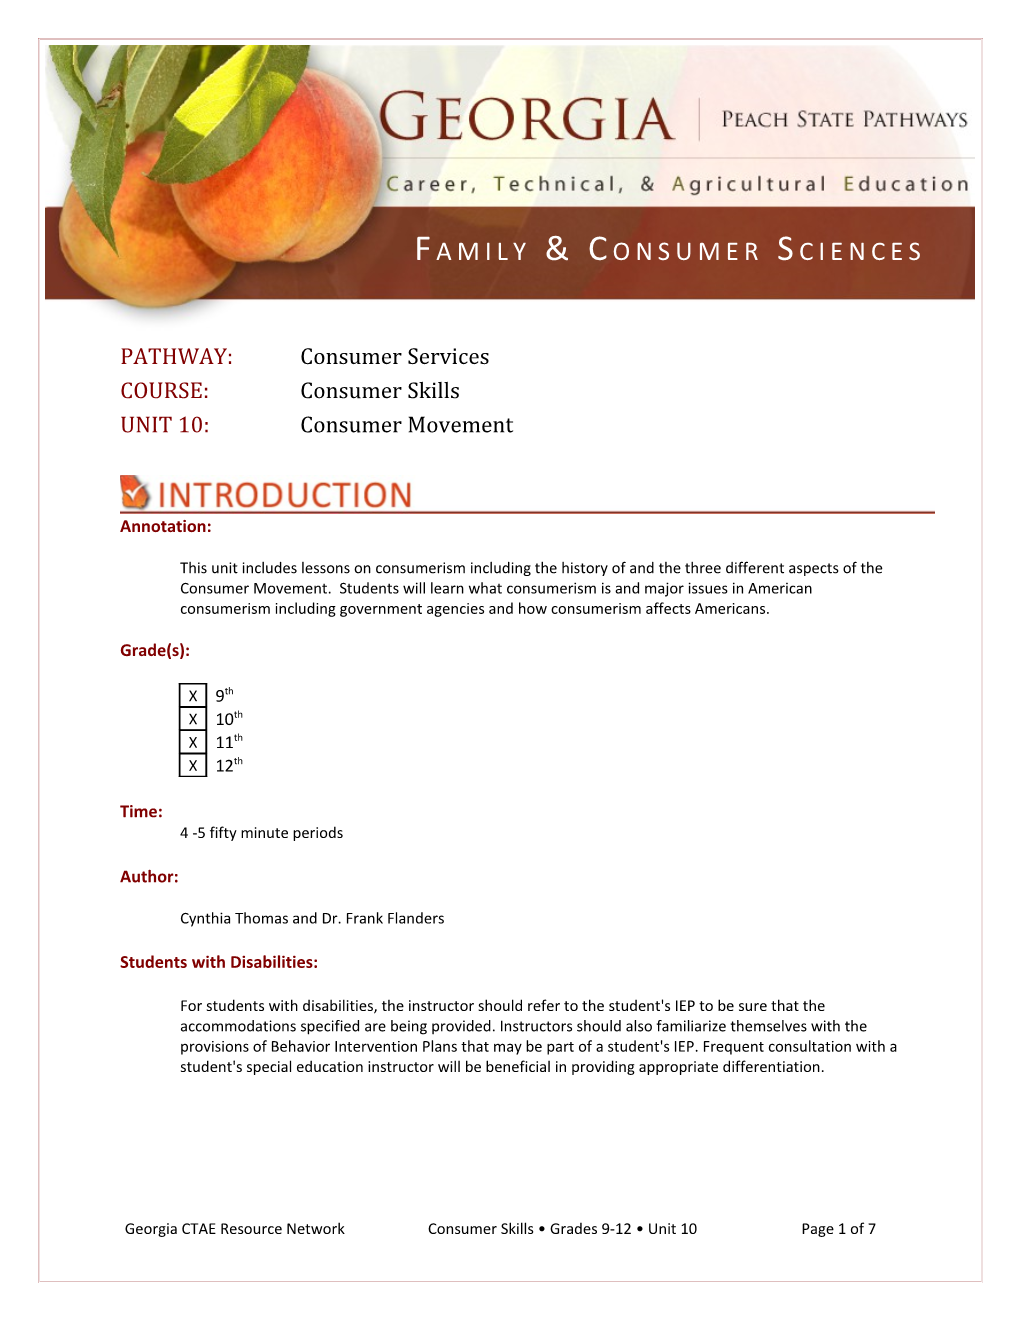 PATHWAY: Consumer Services s1